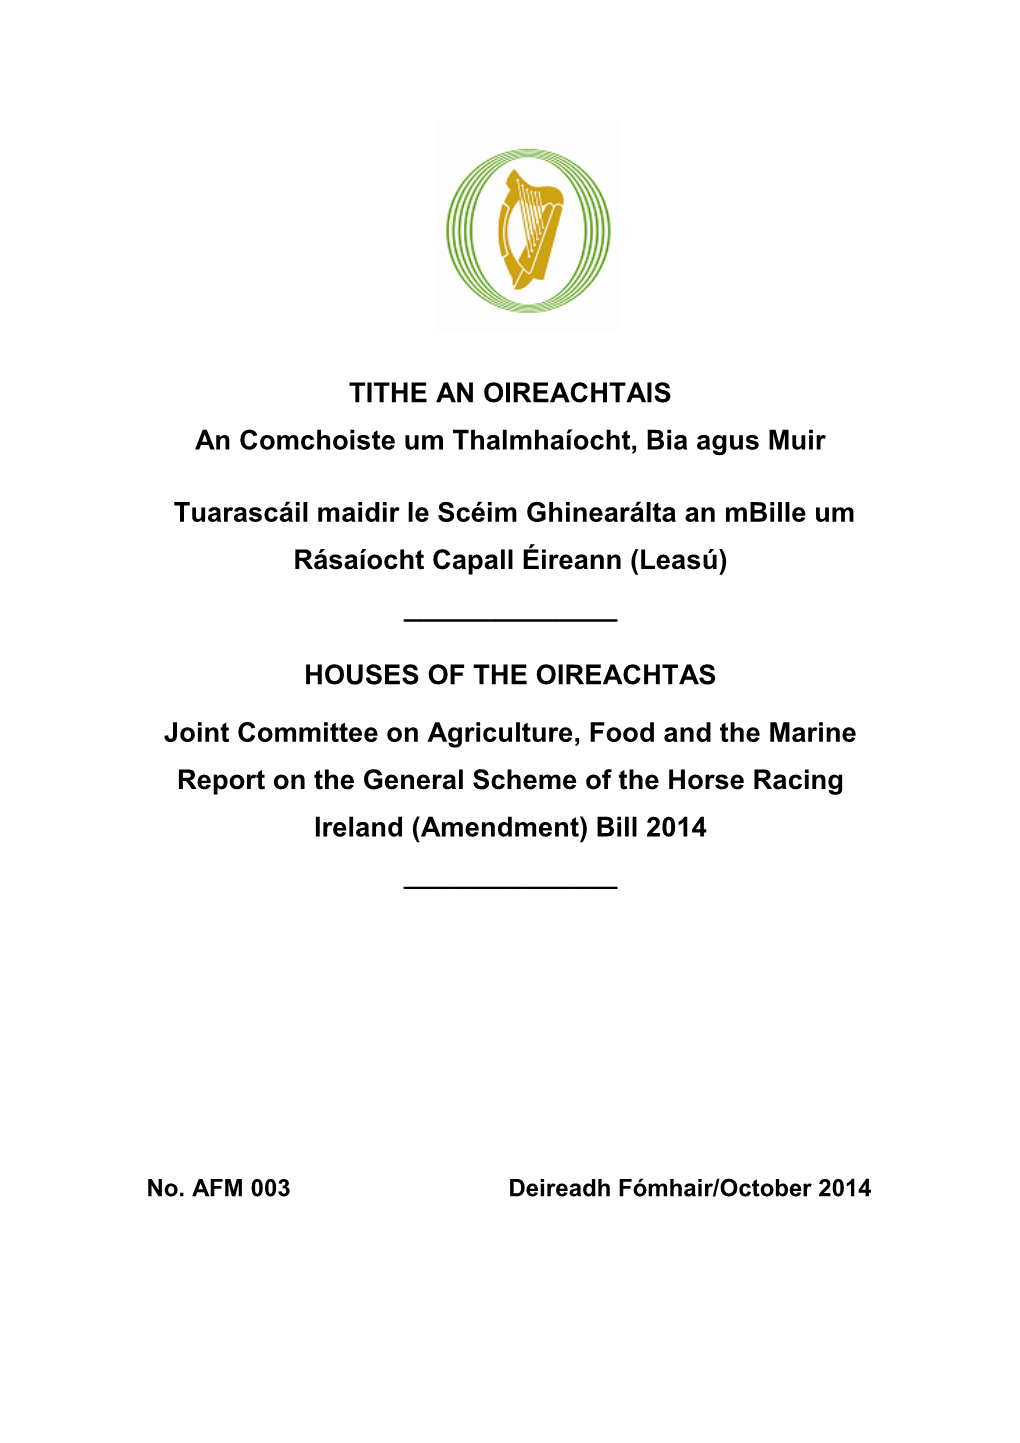 Report on the General Scheme of the Horse Racing Ireland (Amendment) Bill 2014 ______